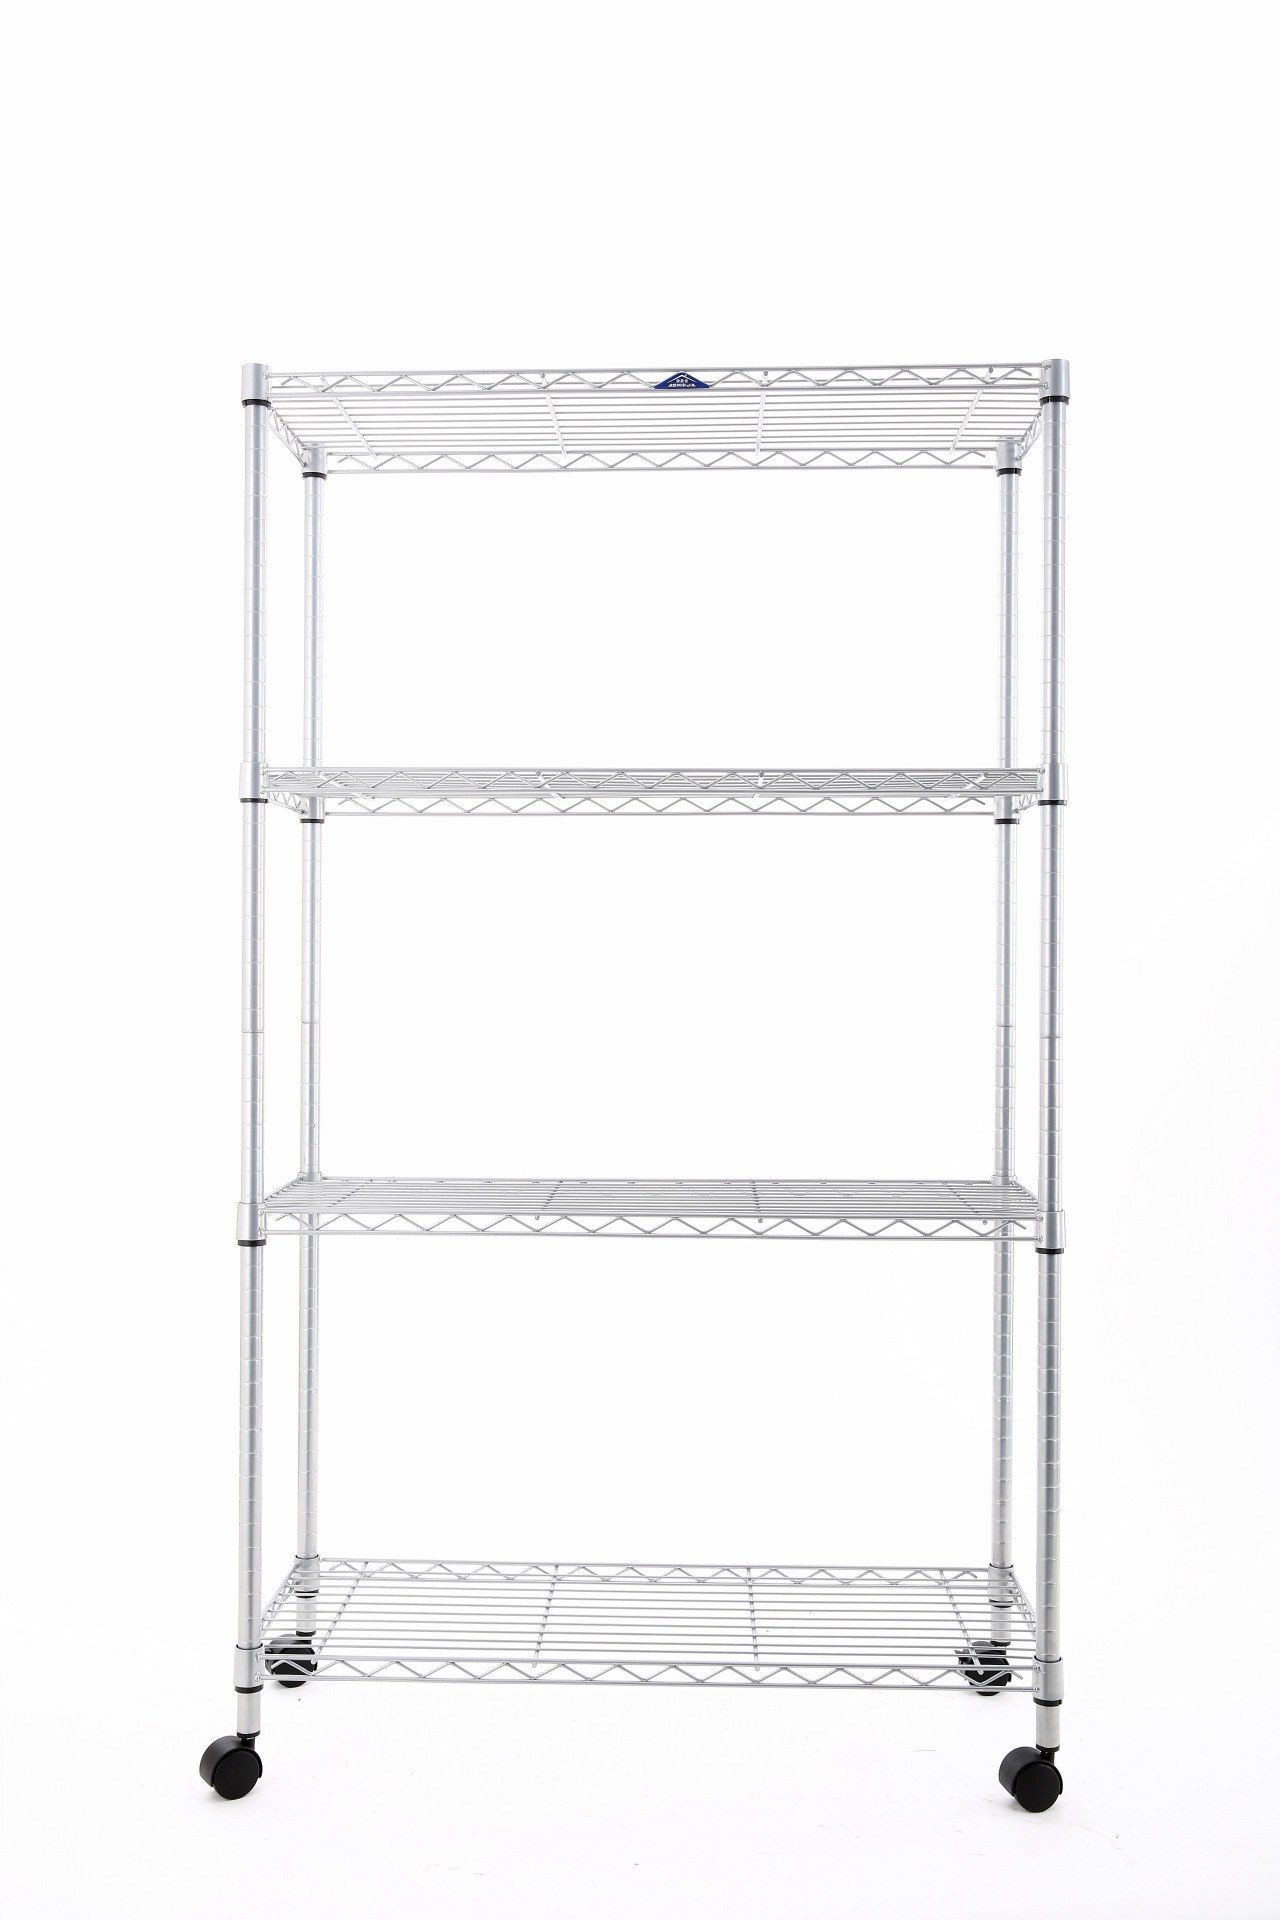 Five layers of metal shelving for domestic use